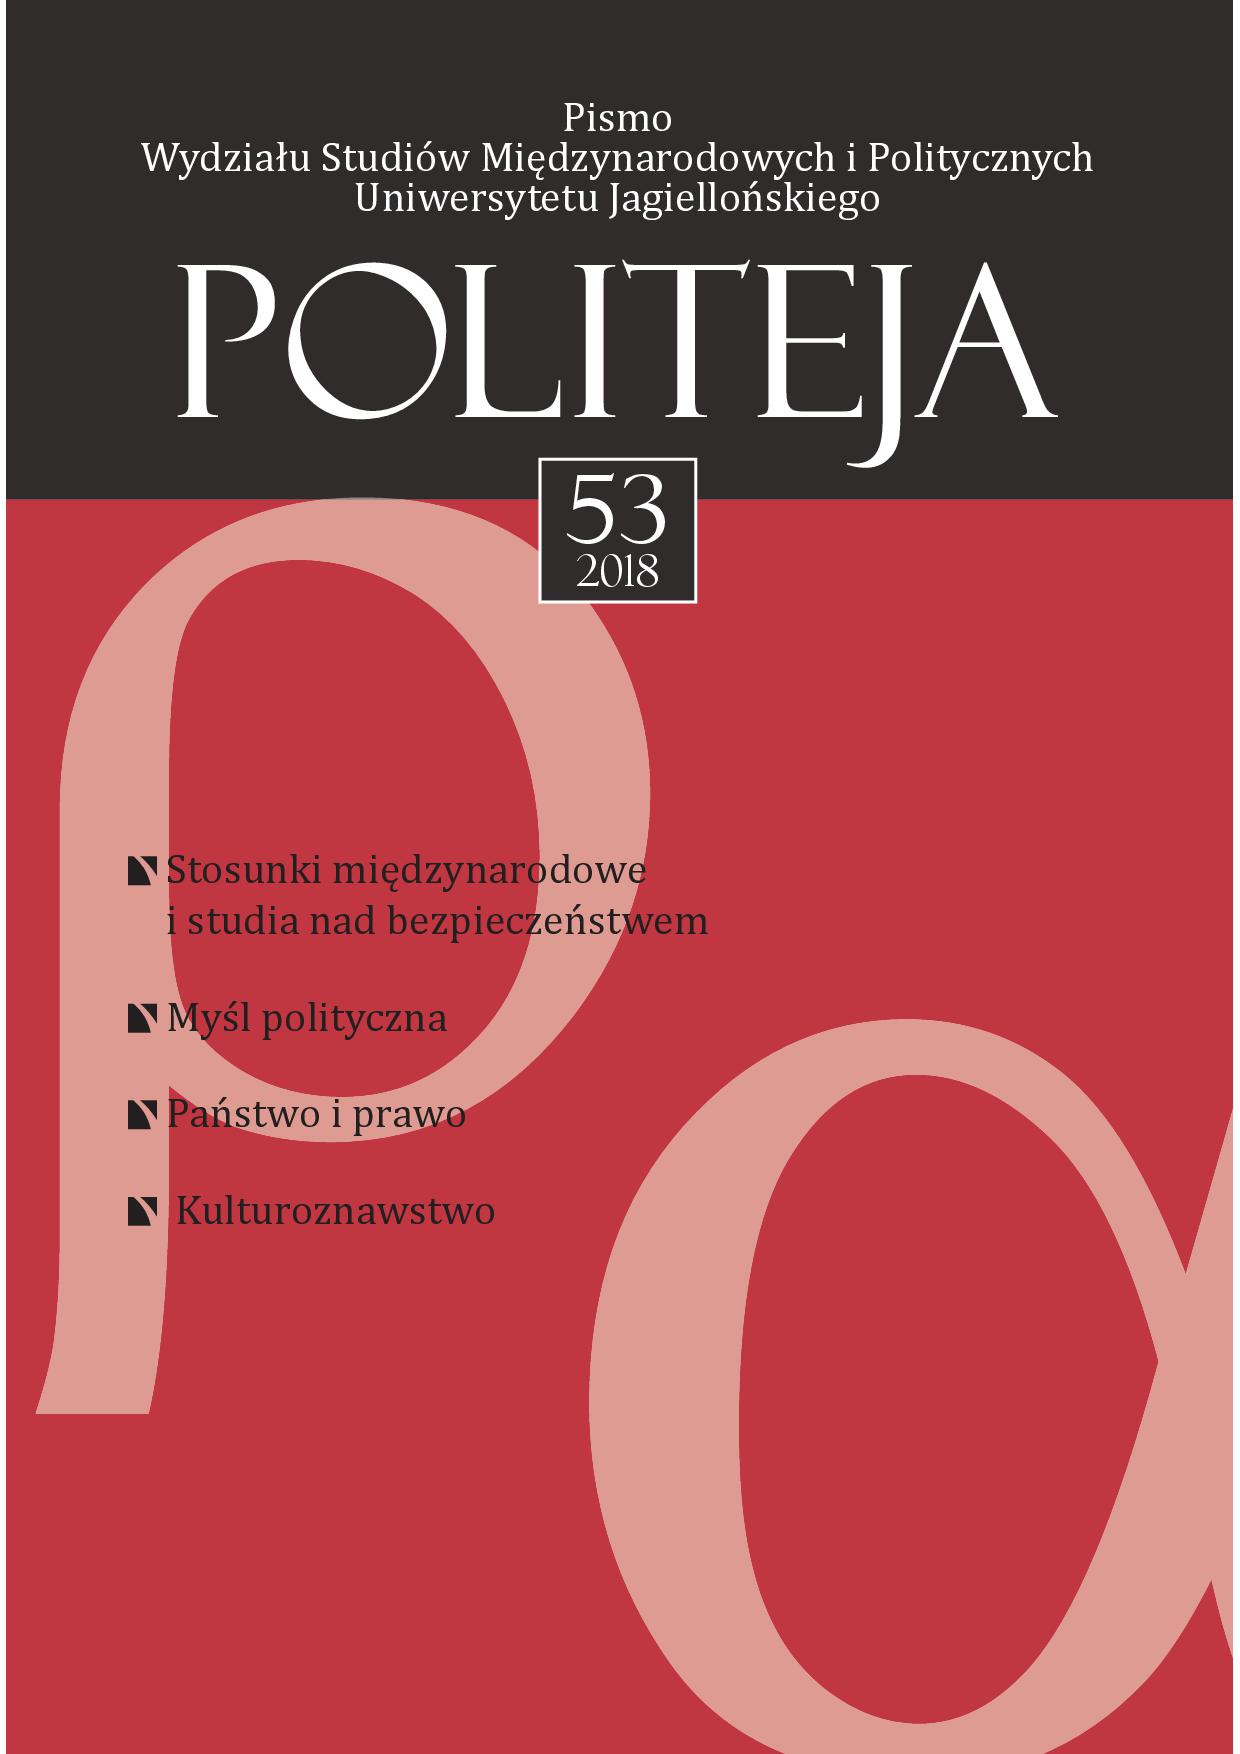 Social and Institutional Construction of Regional Borders in the Western and Northern Lands – on the example of Żuławy and Powiśle Cover Image